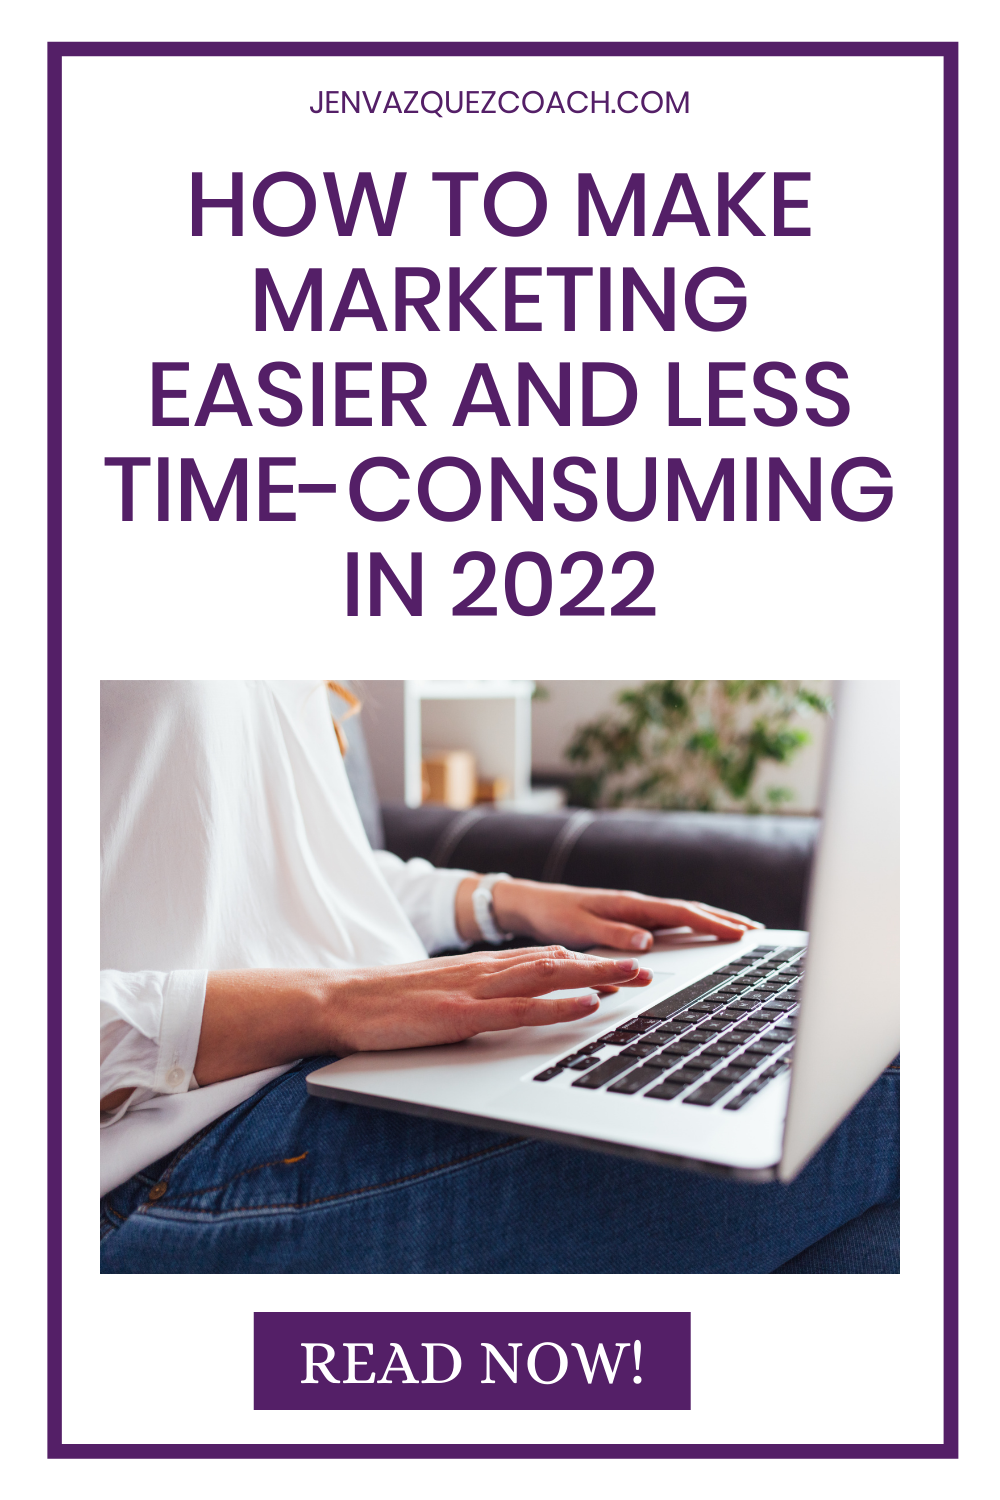 HOW TO MAKE MARKETING EASIER AND LESS TIME CONSUMING IN 2022 BY JEN VAZQUEZ MARKETING STRATEGIST